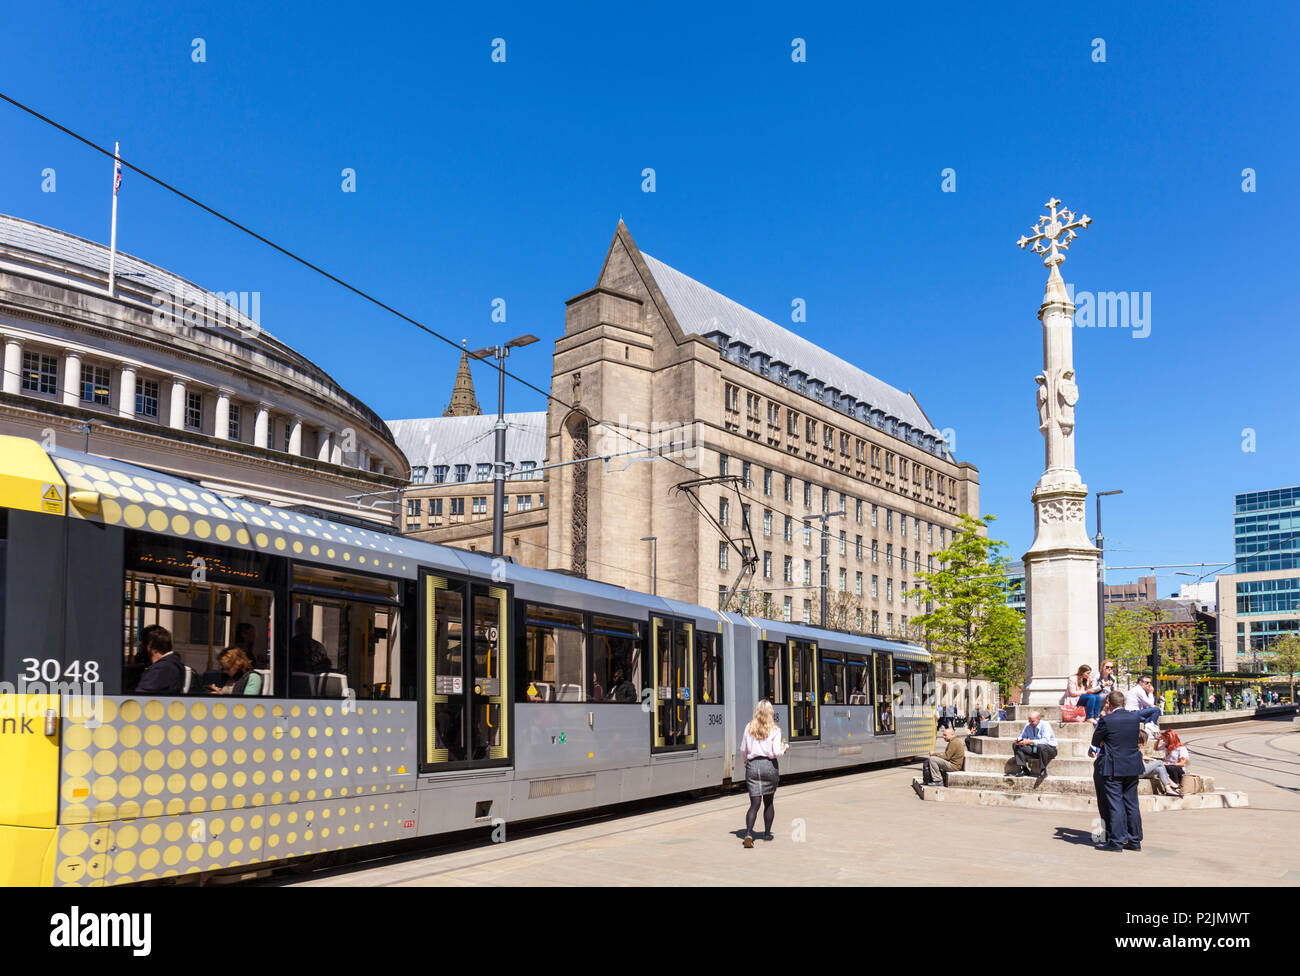 England Manchester England Greater Manchester Stadtzentrum Stadtzentrum manchester Straßenbahn auf St Peters Square Manchester UK Stockfoto